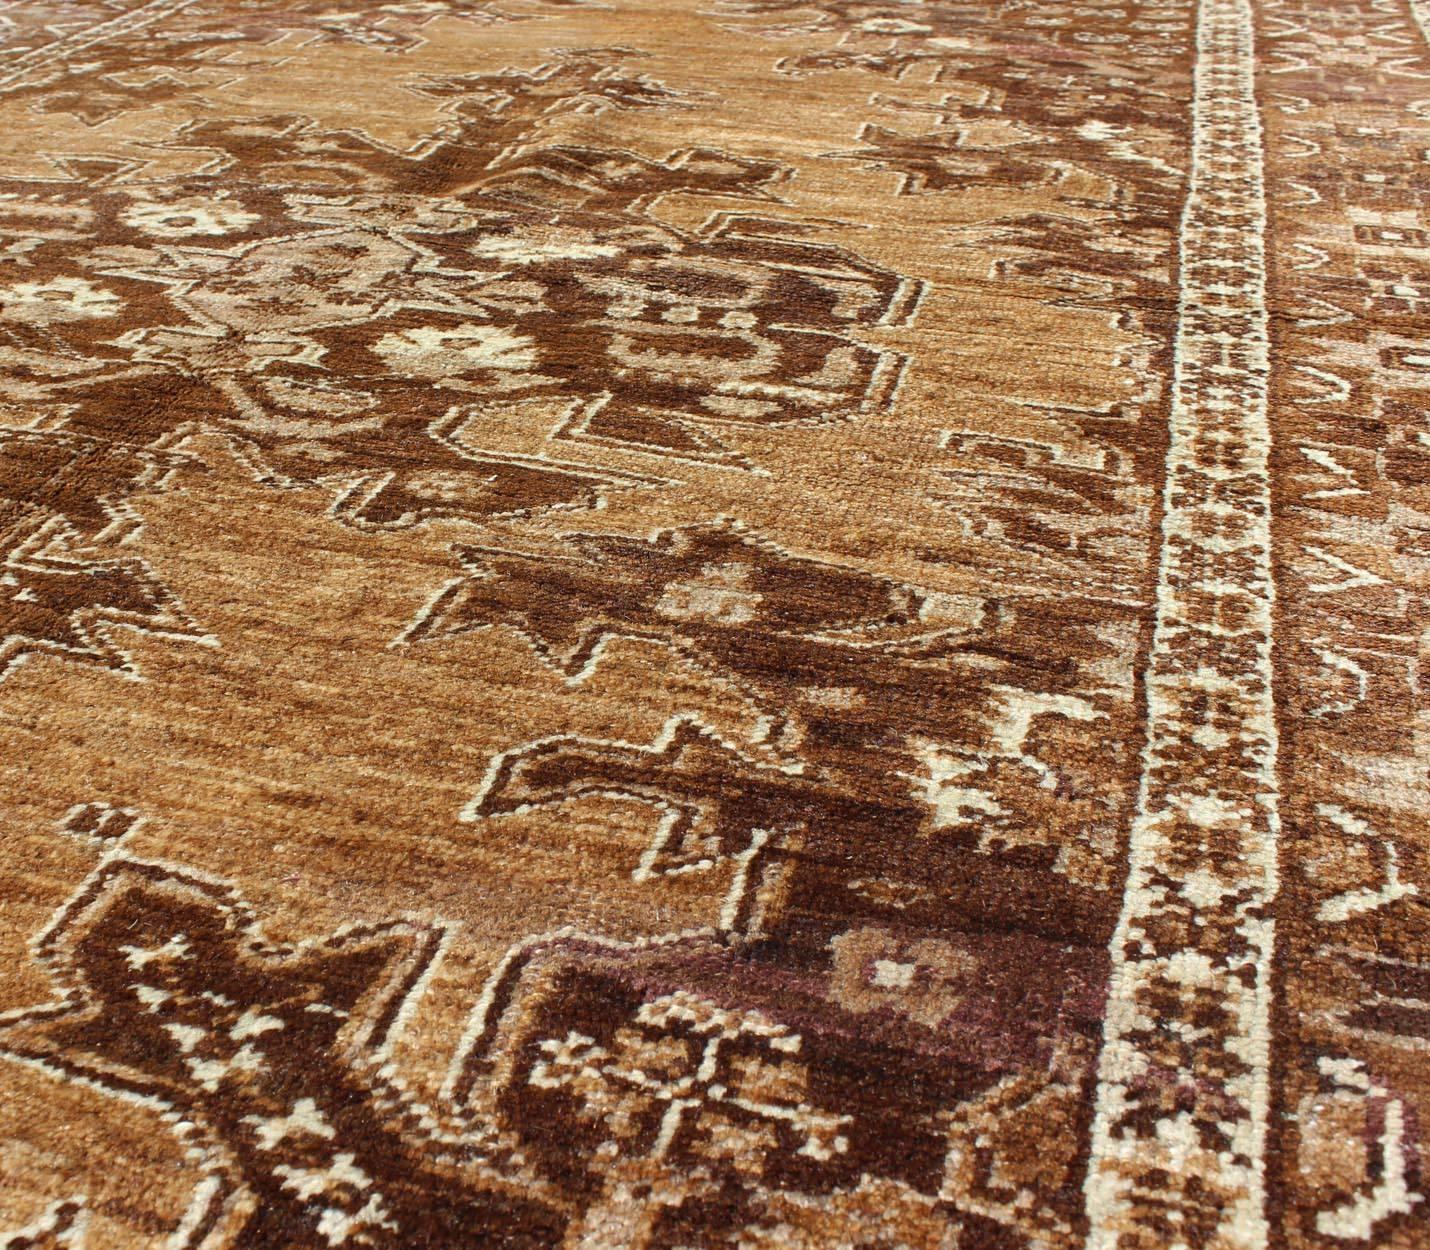 Mid-20th Century Brown & Caramel Tones Antique Turkish Oushak Rug With Multi-Layered Medallion